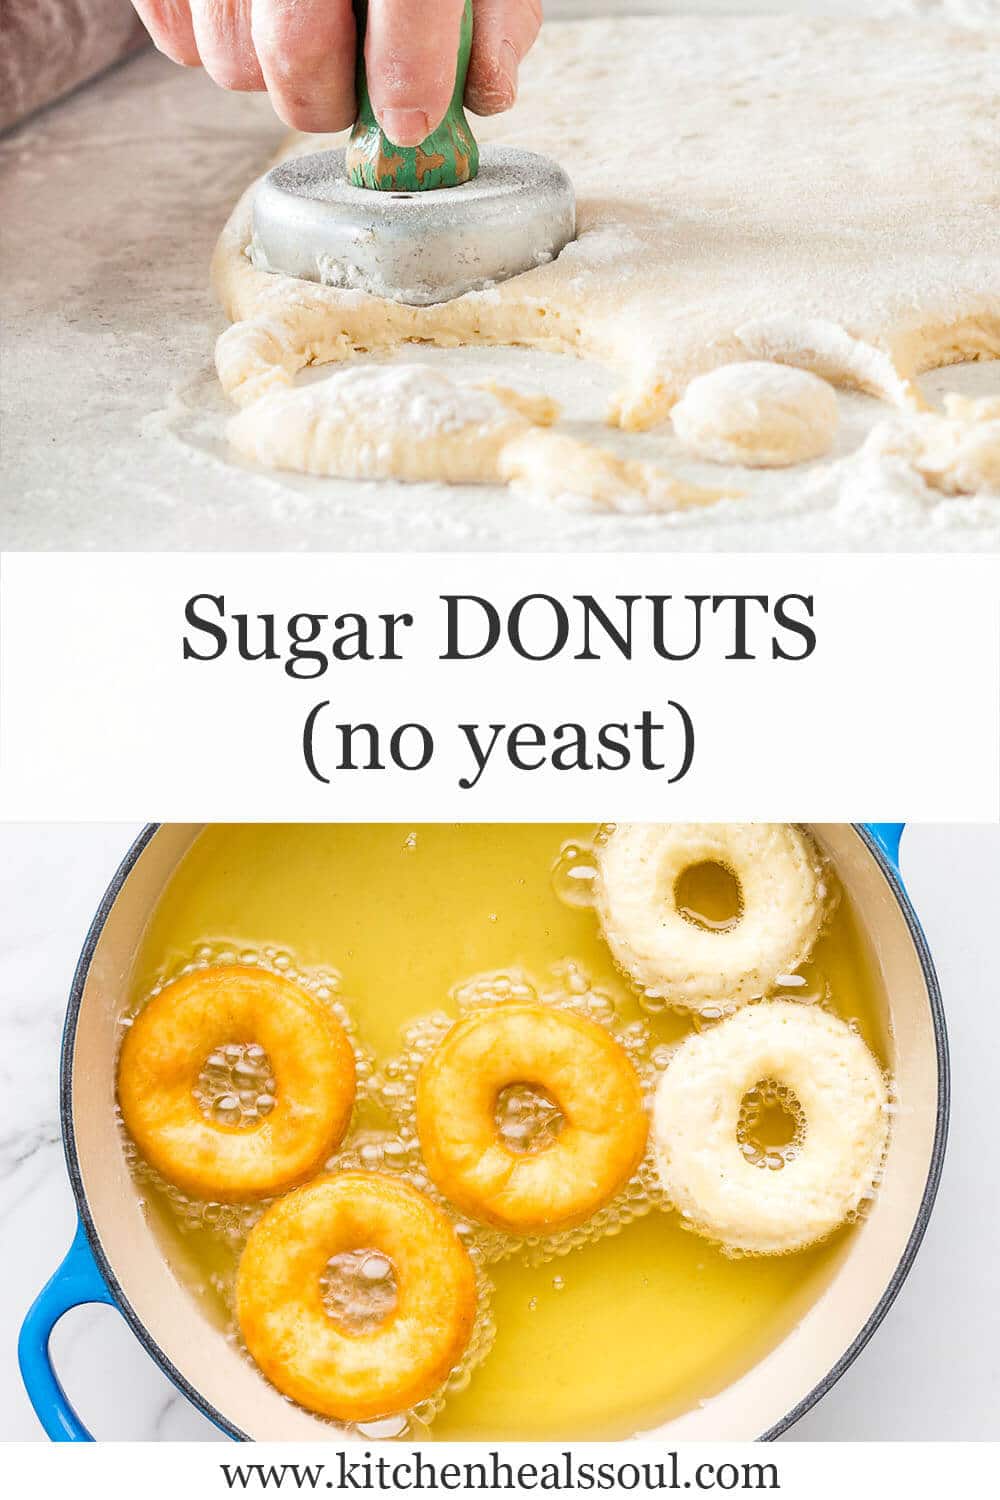 Cutting and frying old fashioned sugar donuts using a vintage donut cutter to cut them out and a Le Creuset Sauté pan to fry them in oil on the stove